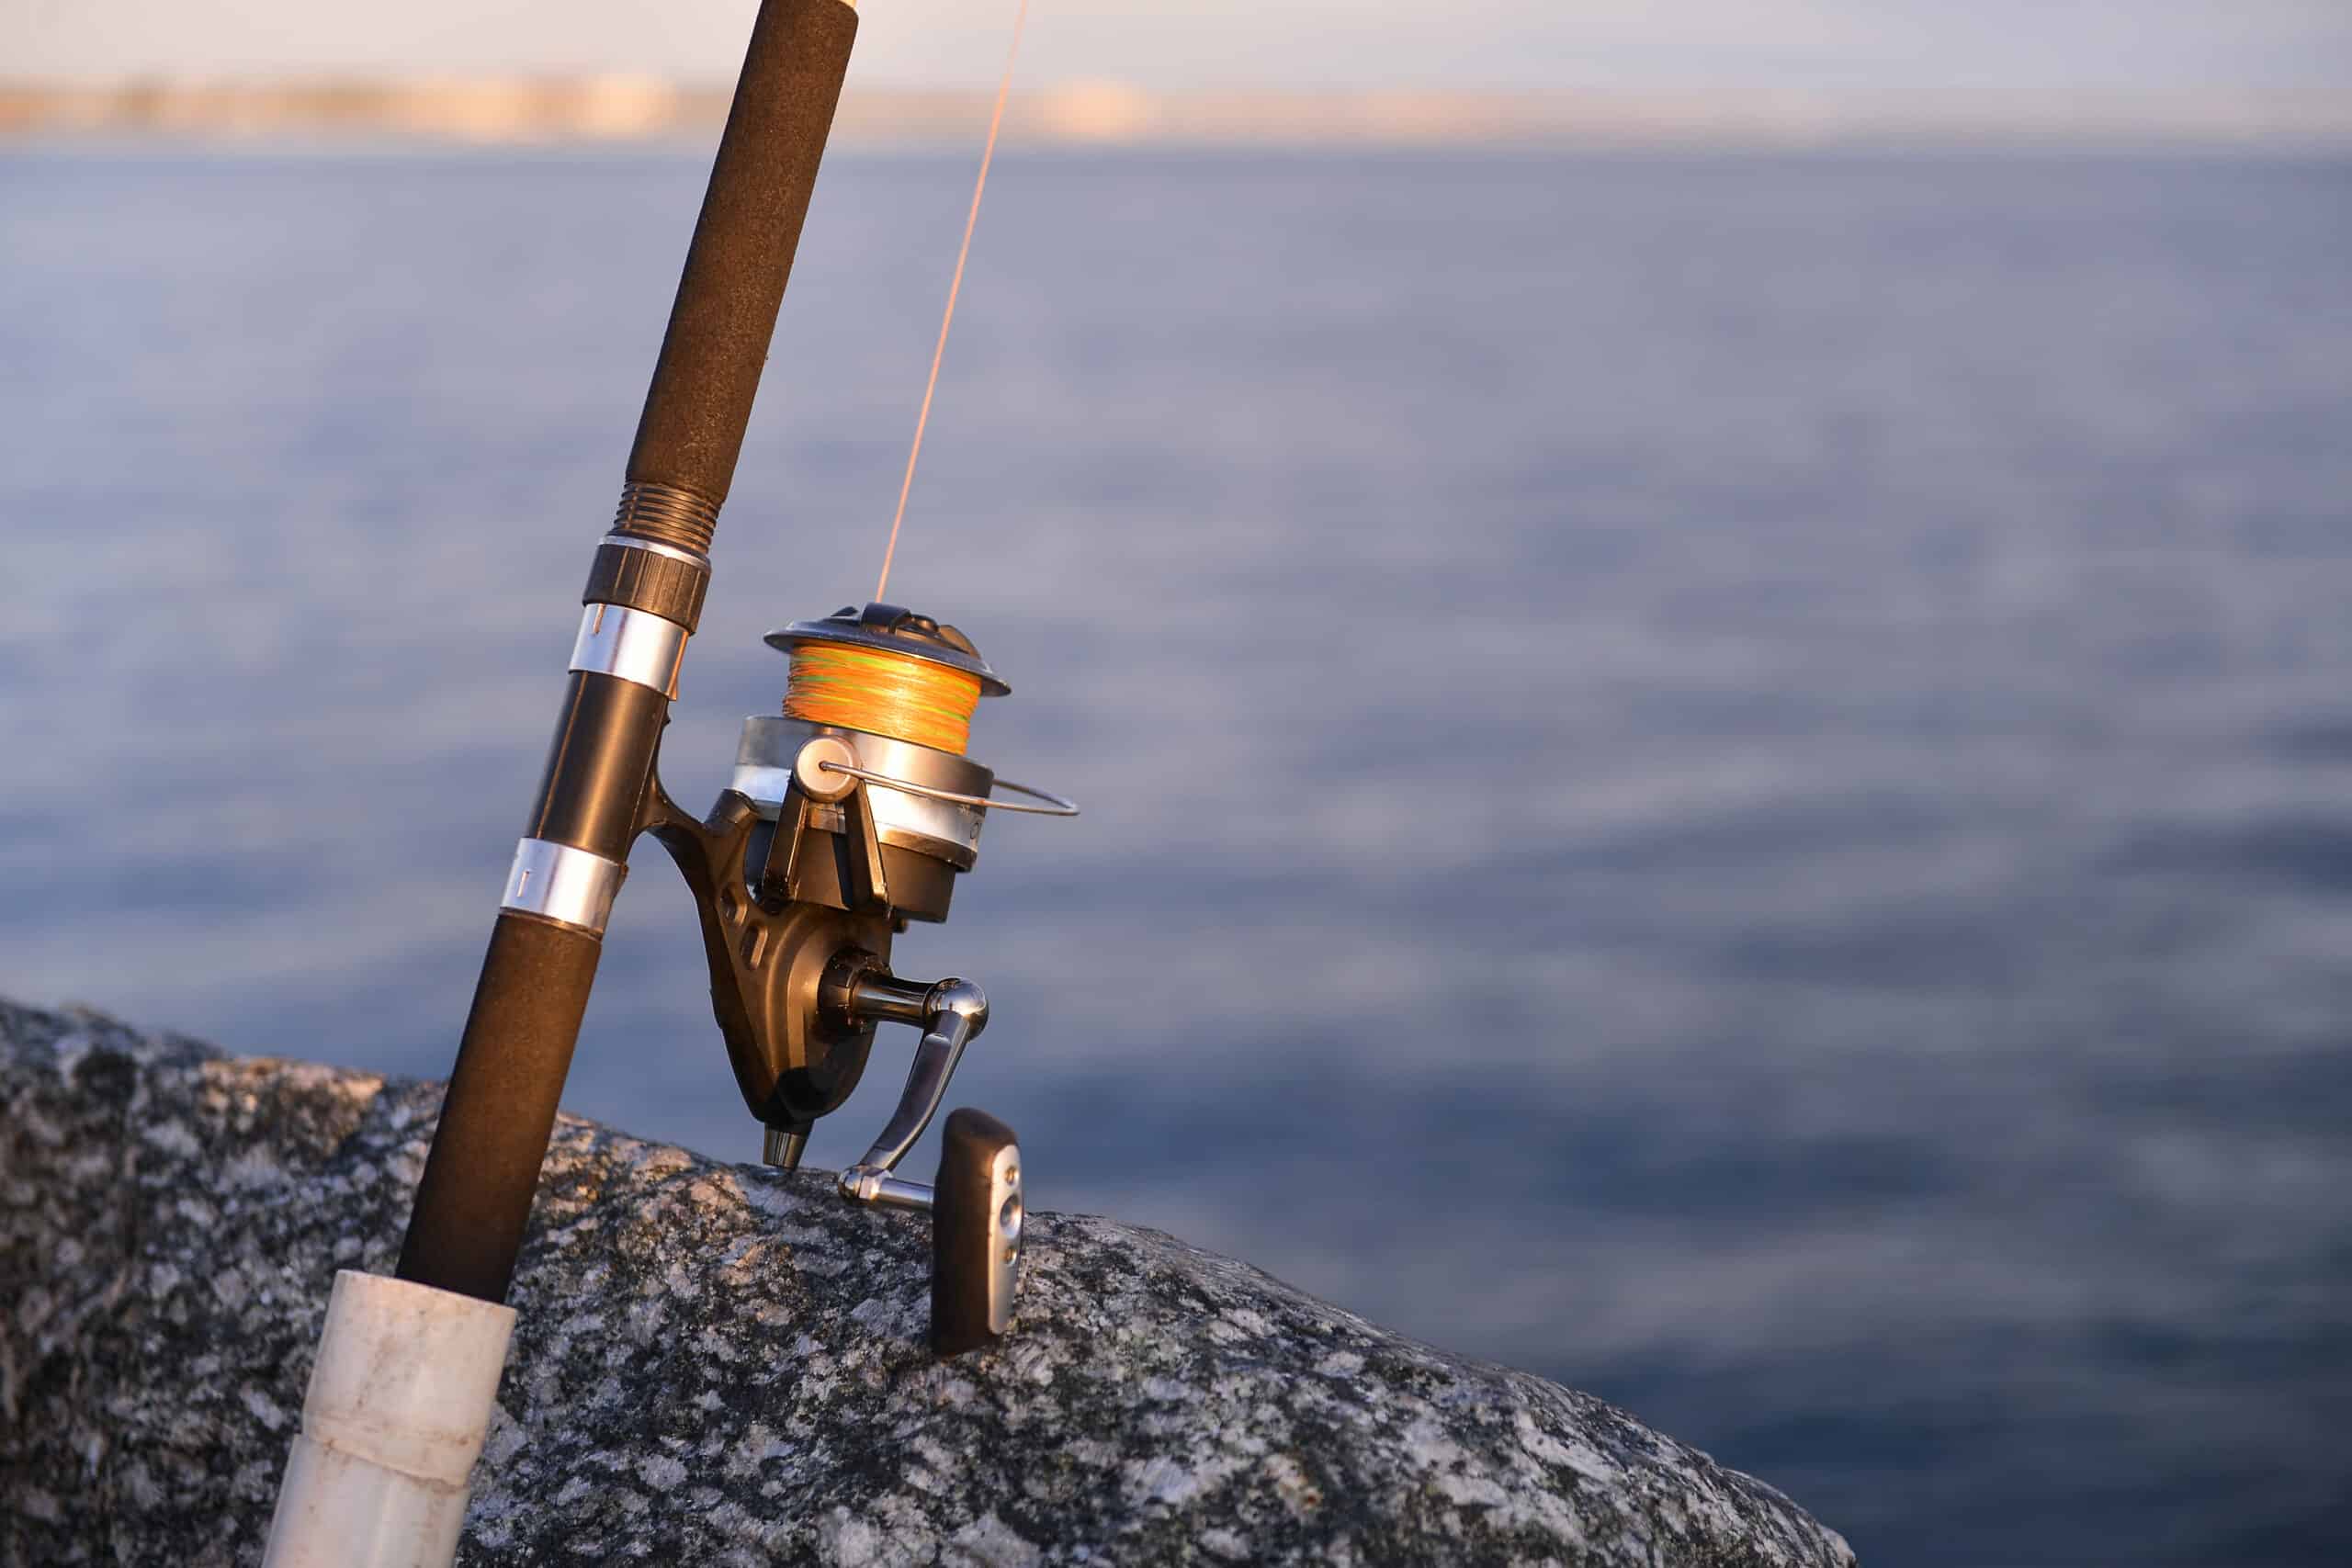 fanatic4fishing.com : What is a spinning rod good for?